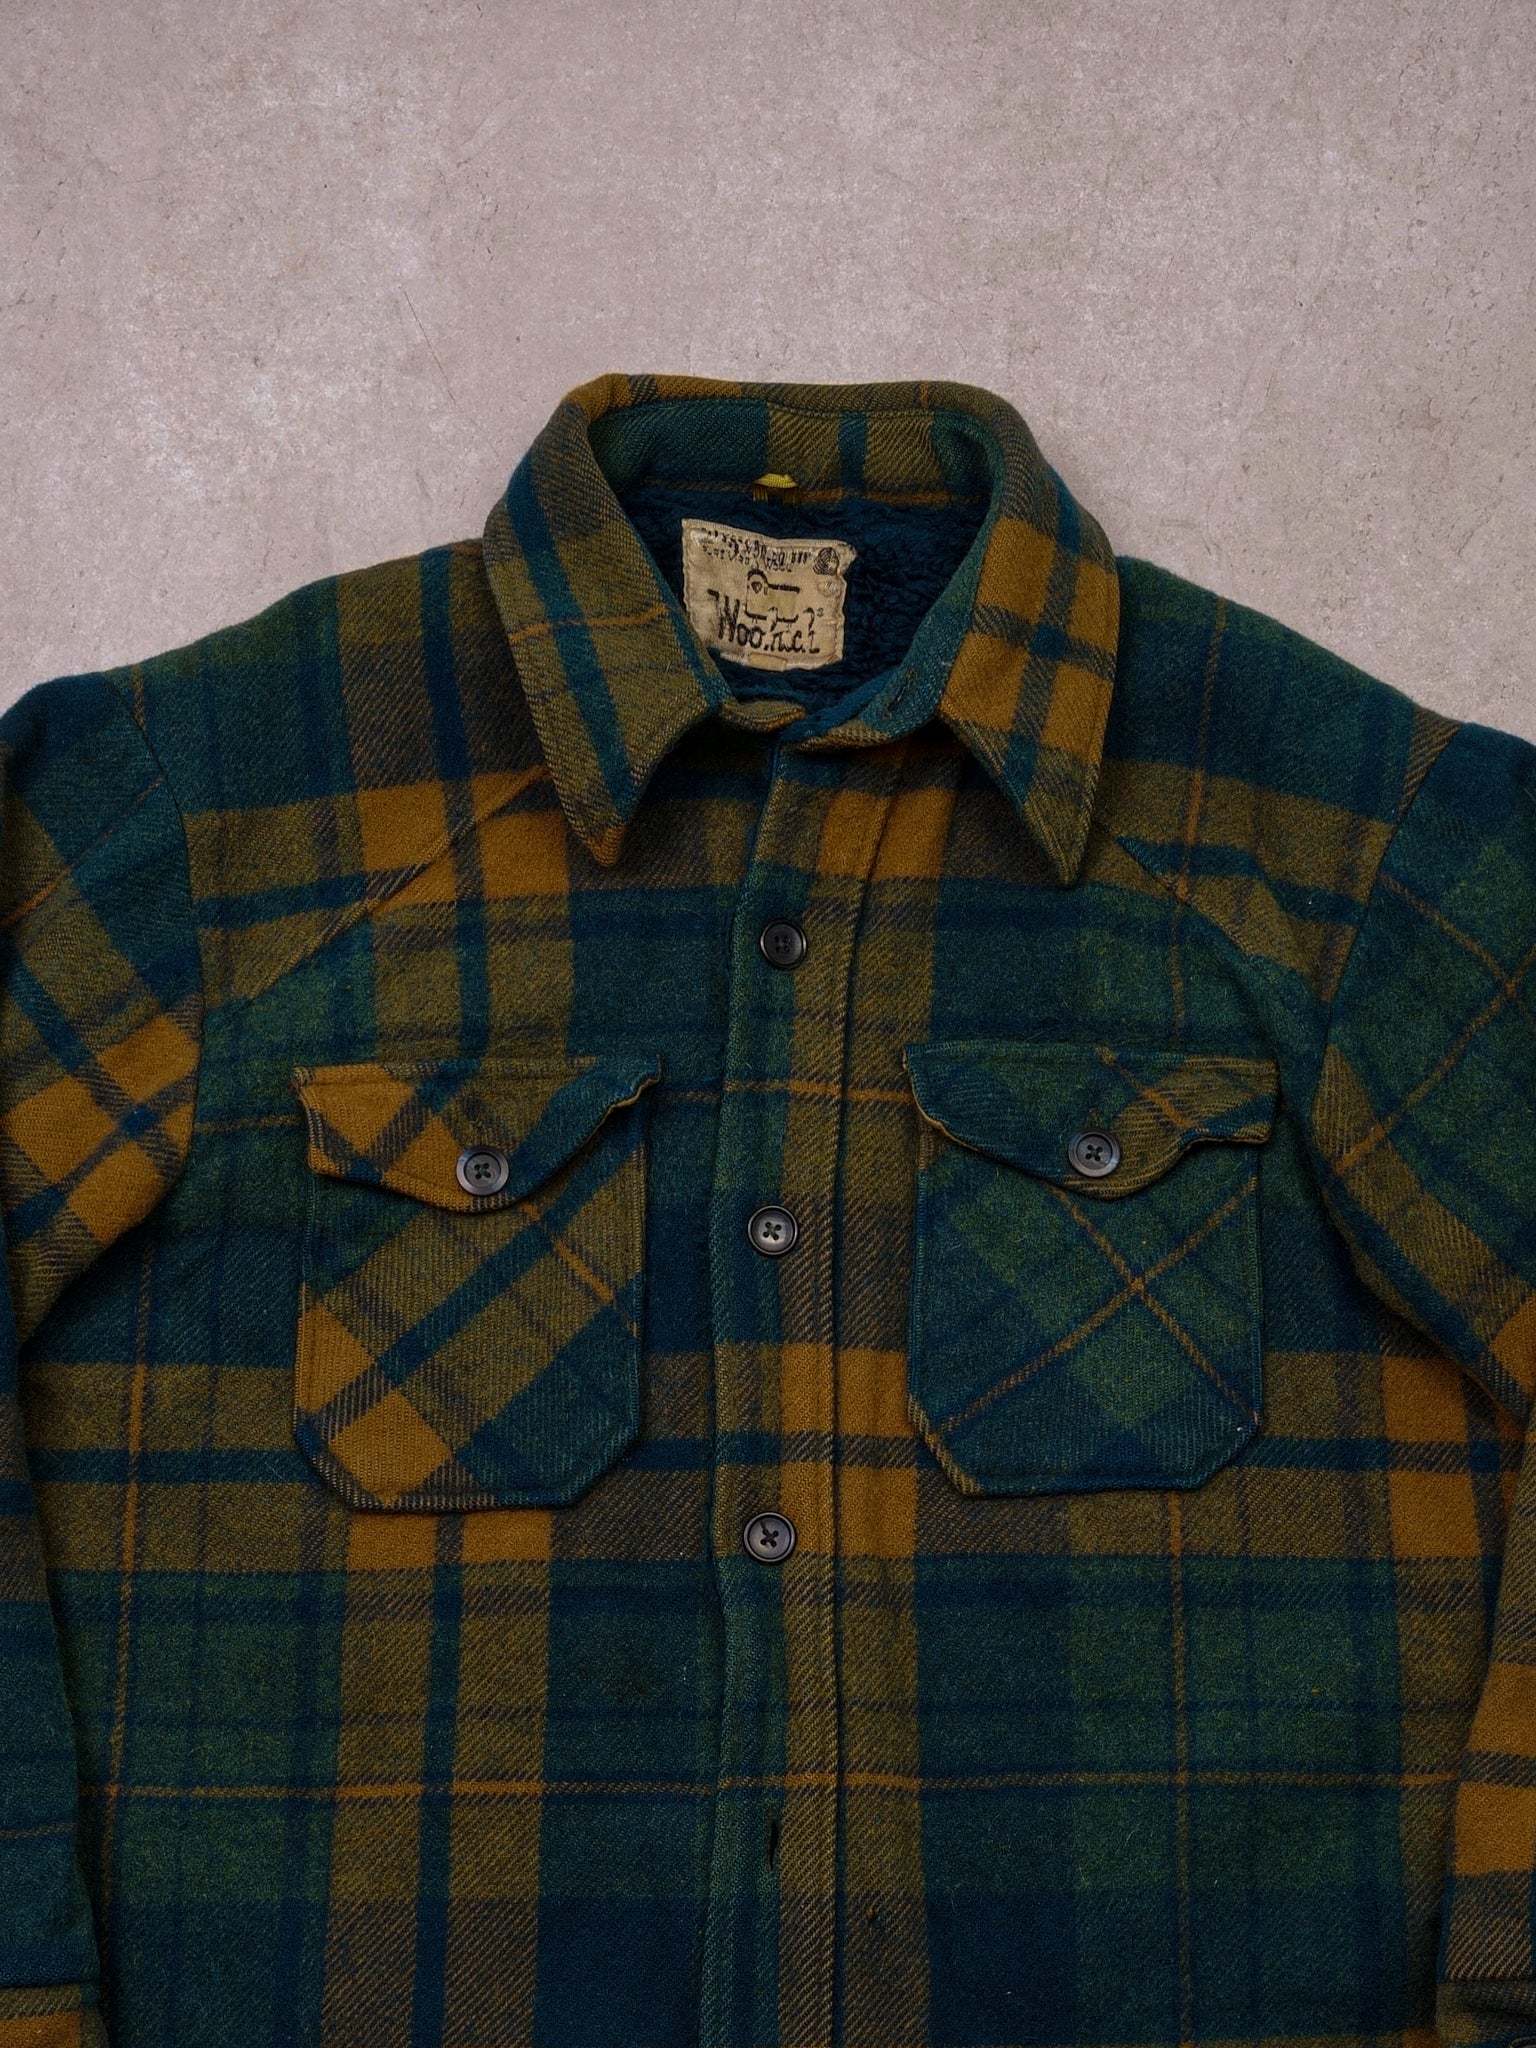 Vintage 90s Green, Blue and Yellow Woolrich Plaid Wool Fleece Line Jacket (XL)